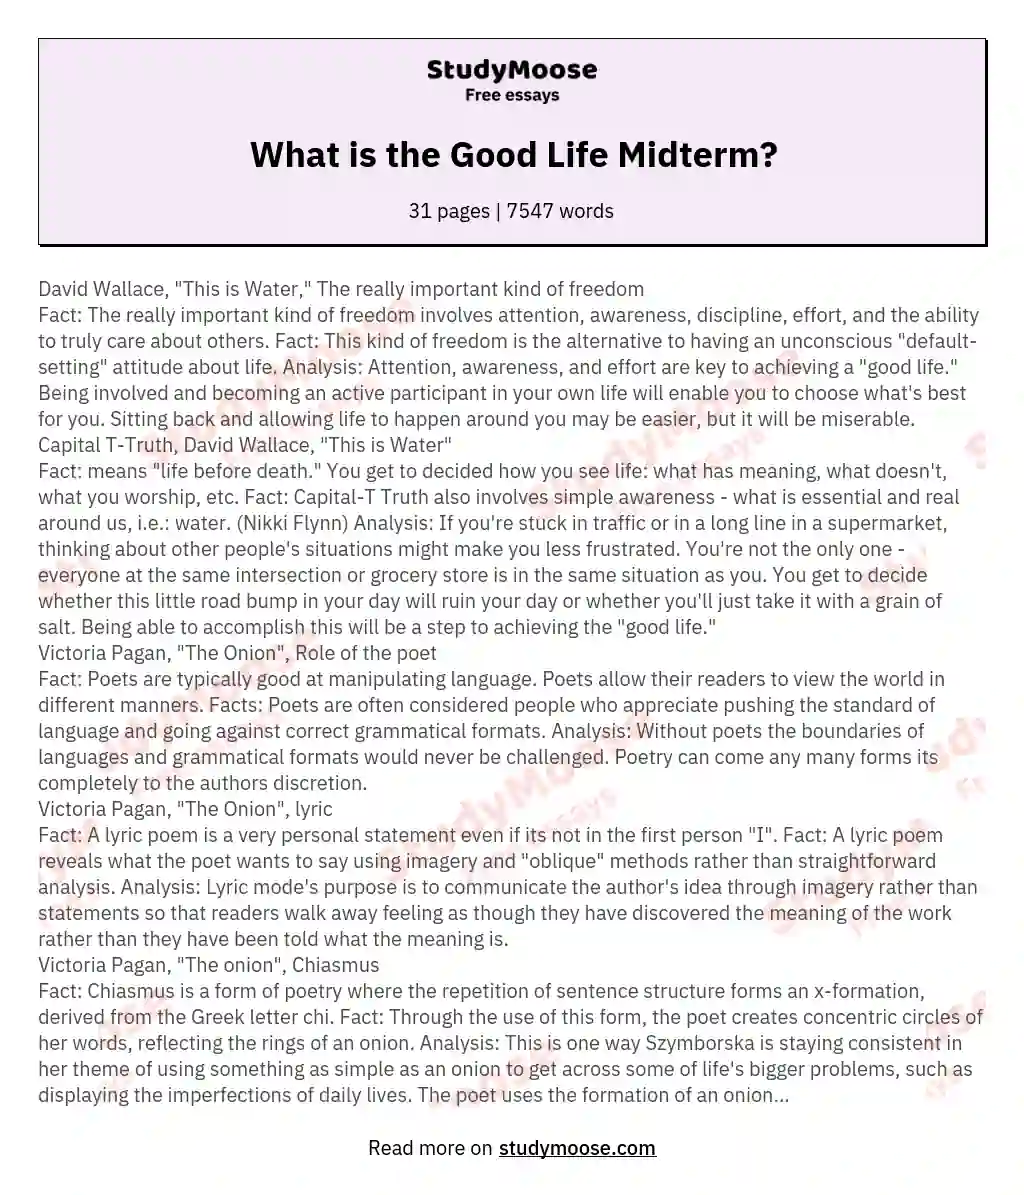 What is the Good Life Midterm?